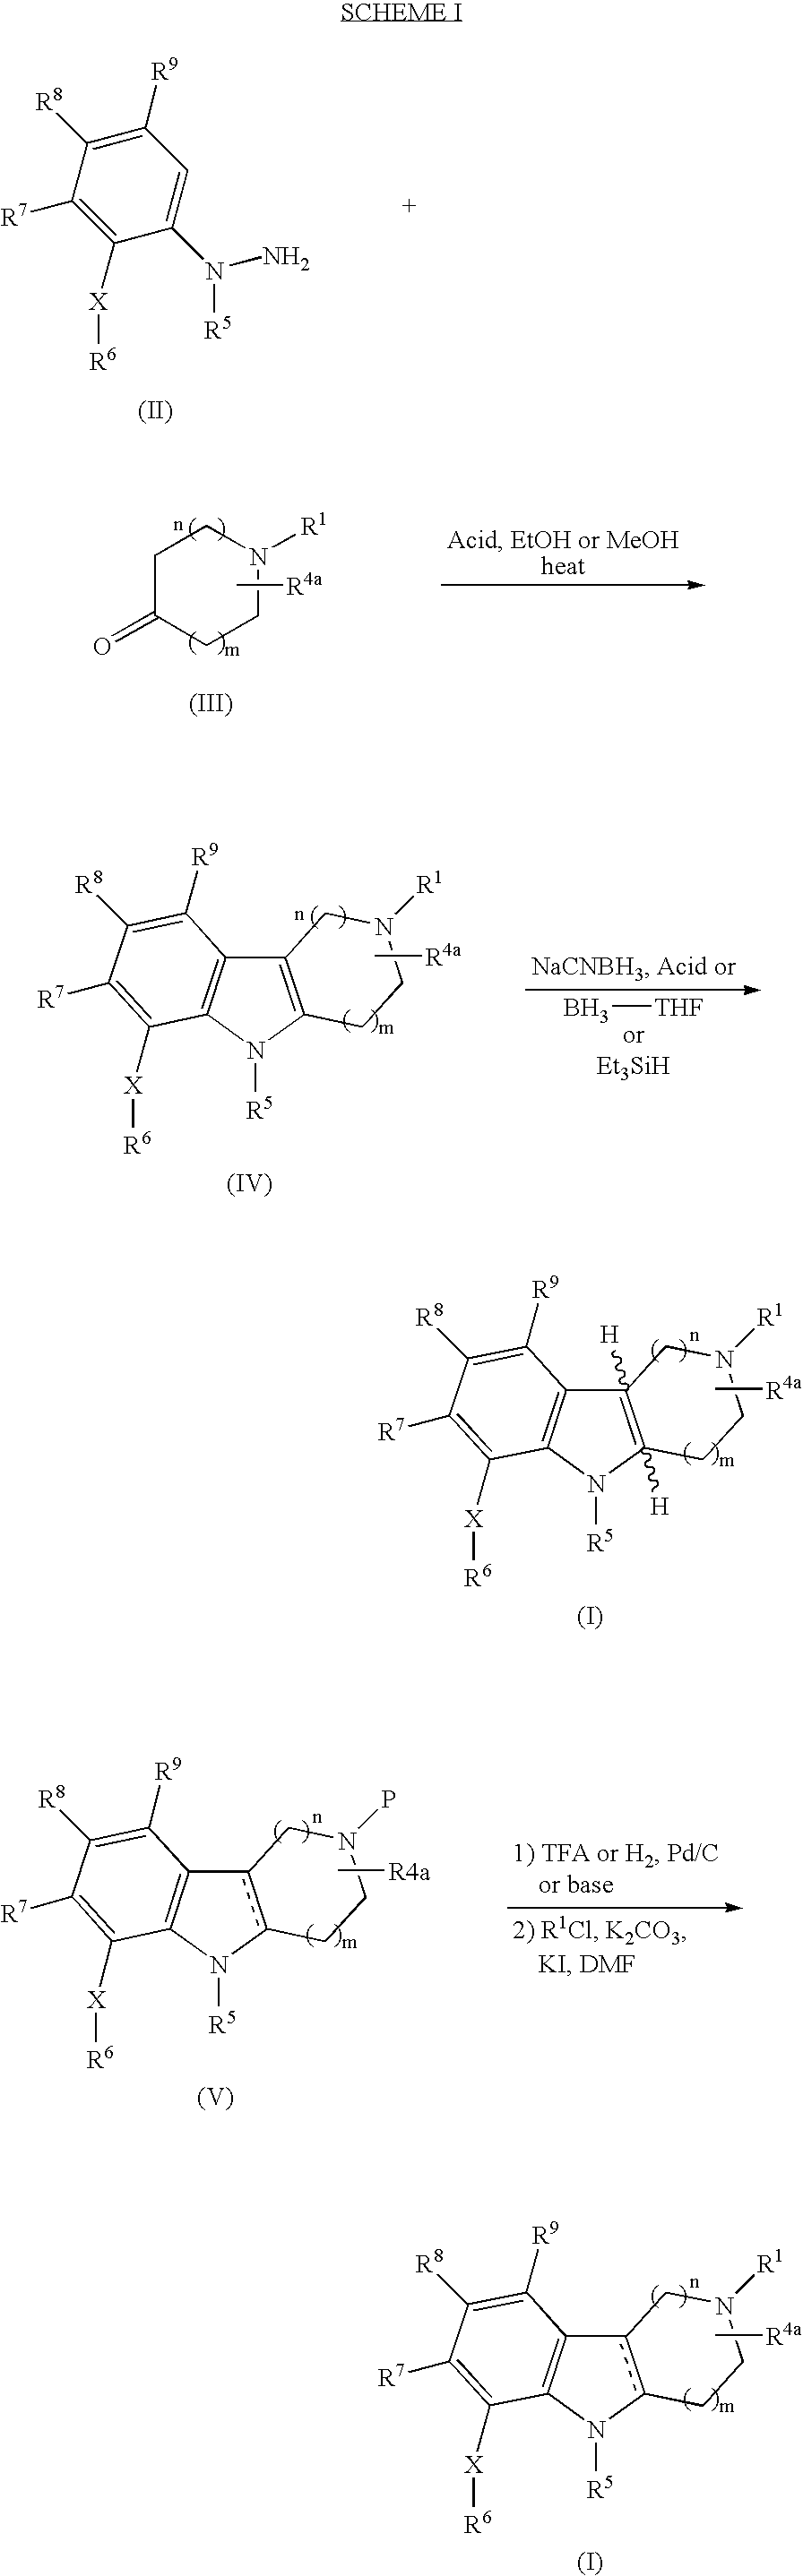 Substituted hexahydro-pyridoindole derivatives as serotonin receptor agonists and antagonists